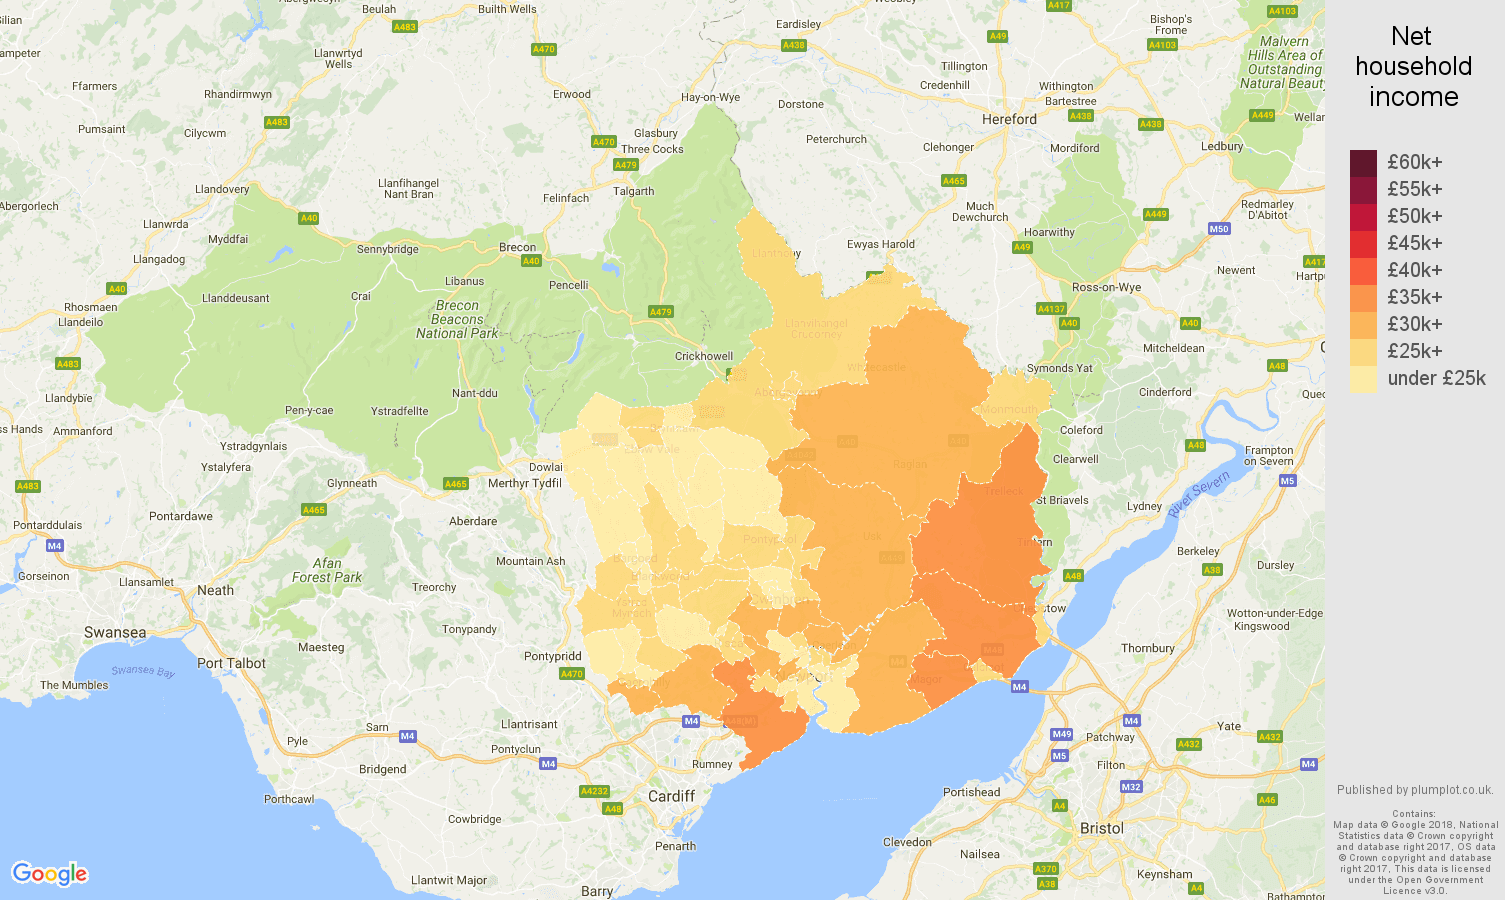 Gwent net household income map